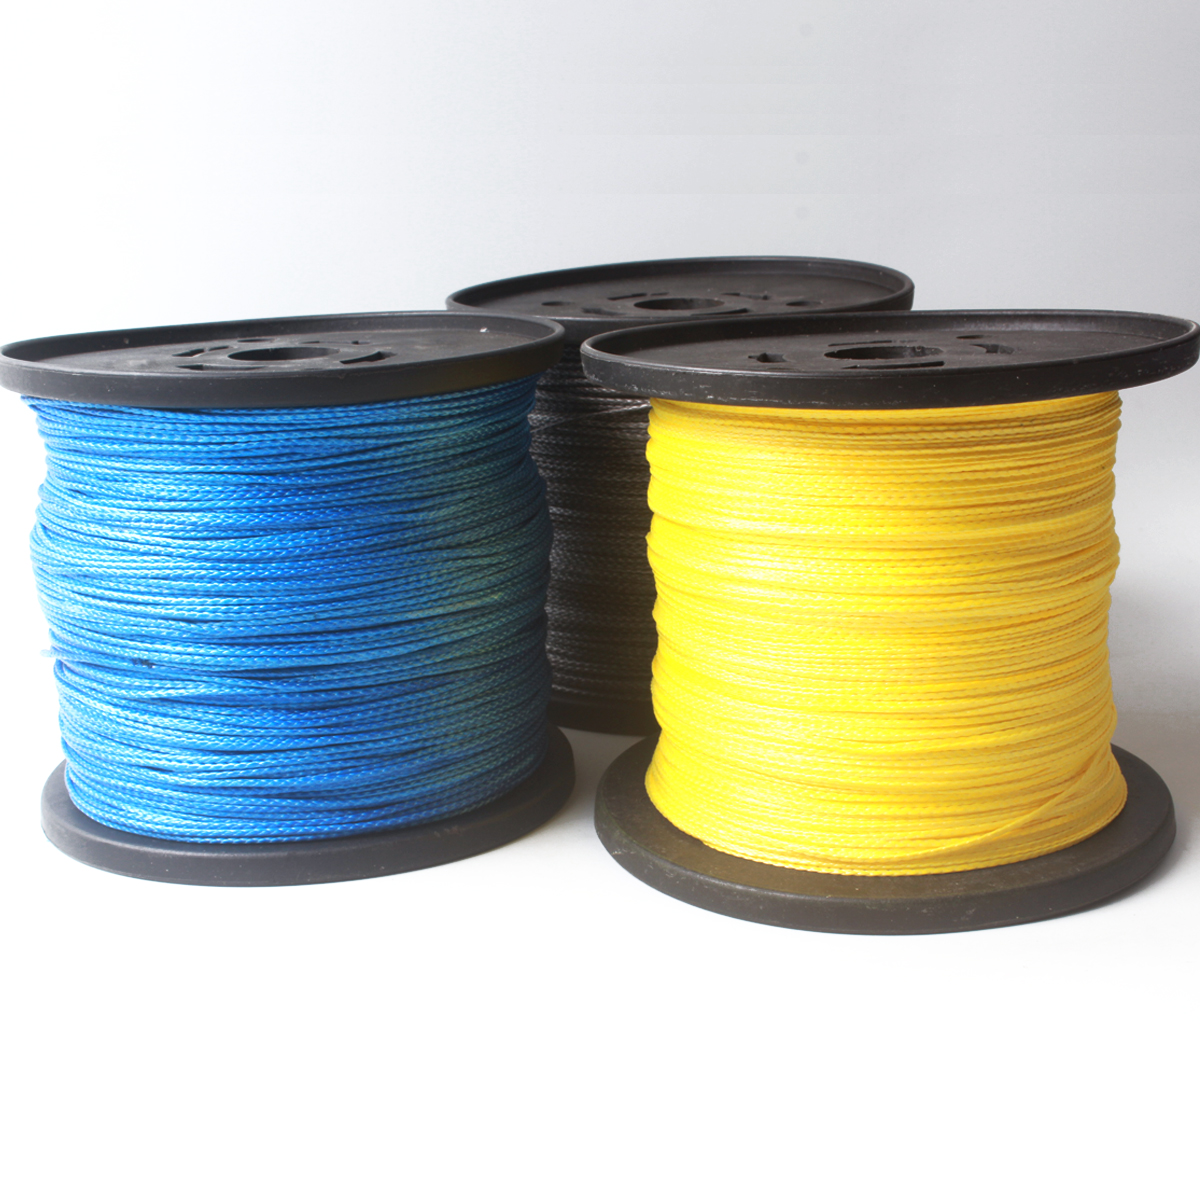 12 Strands Nylon Uhmwpe Winch Rope For Logging